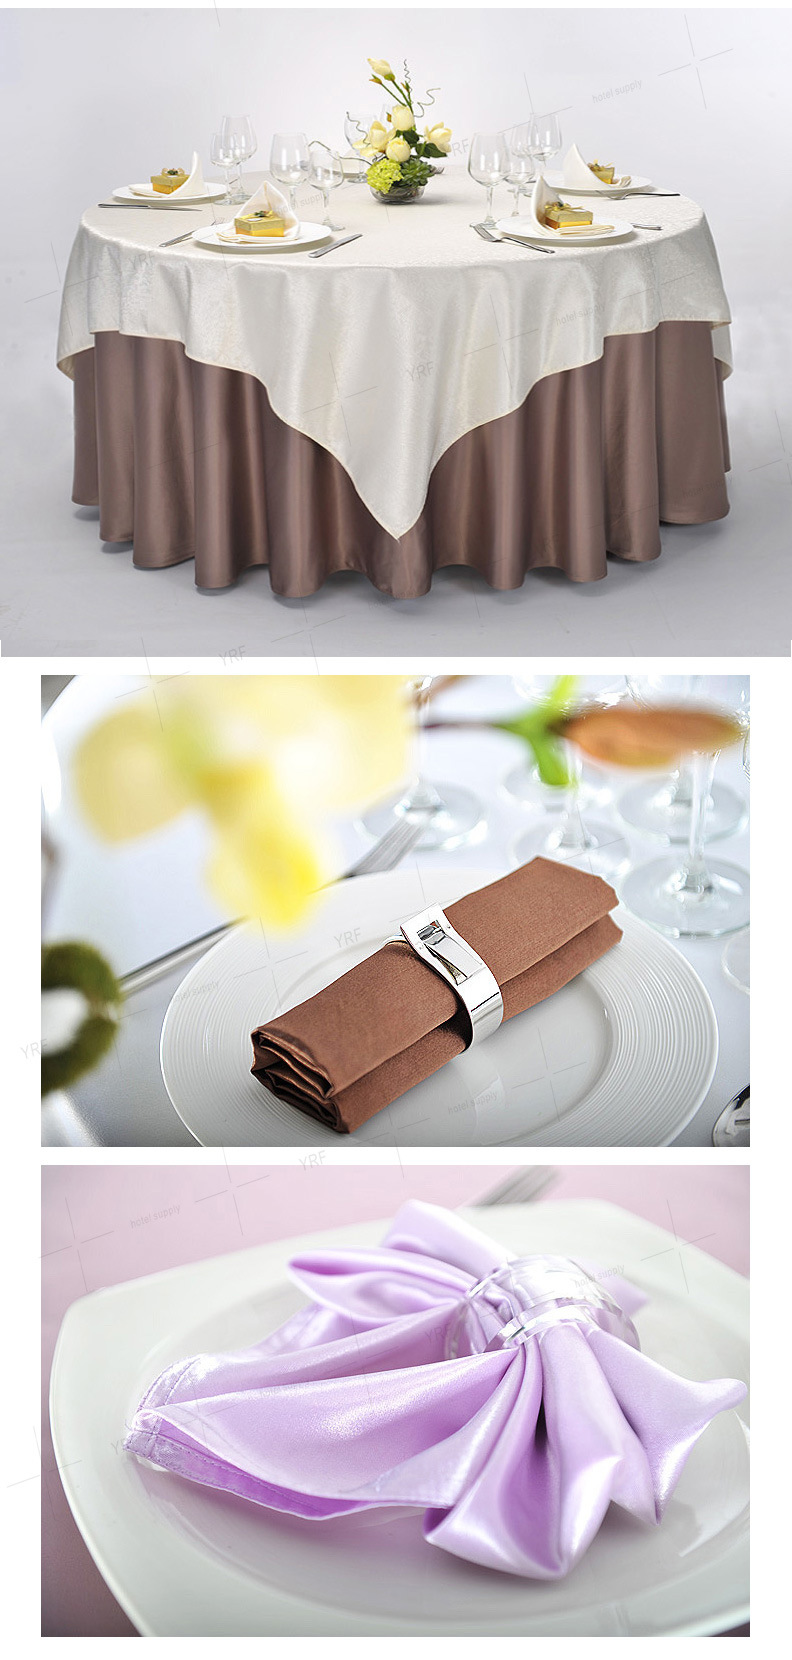 Guangzhou Foshan Polyester Round Table Cloth Table Linen for Wedding